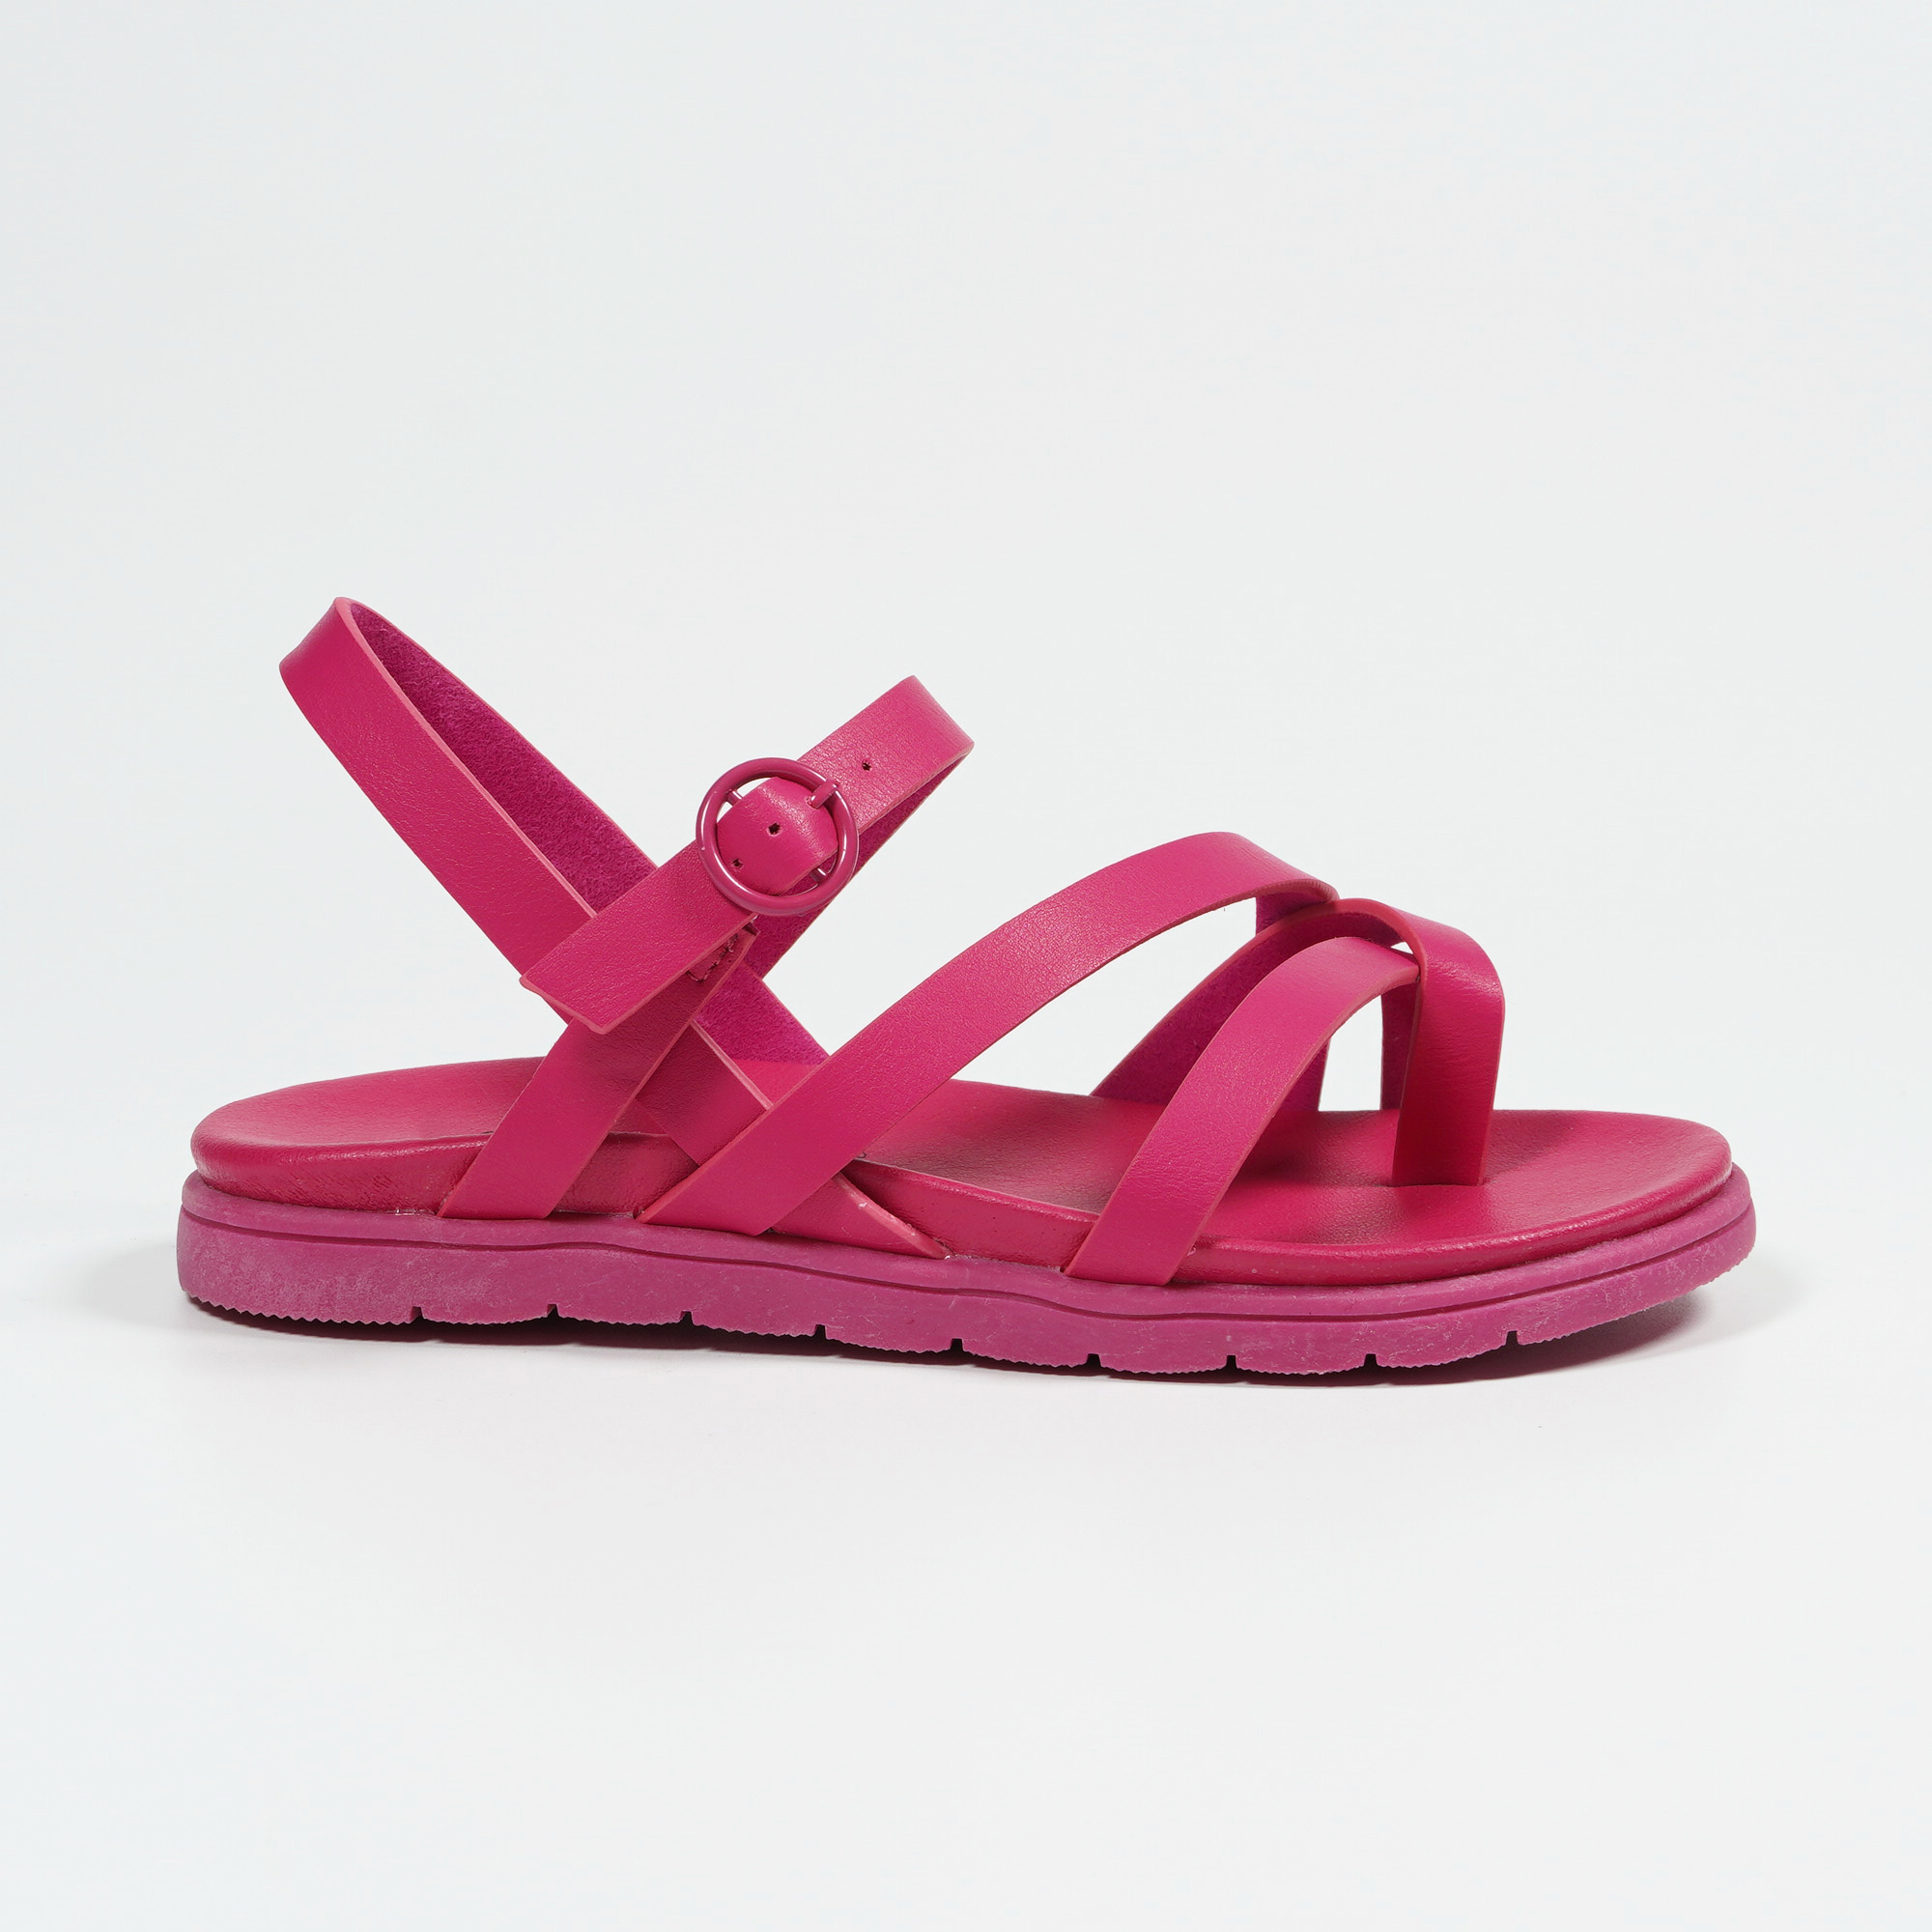 Nikoofly Trend Minimalist Cross Strap Sandals Fuchsia Pink White Color Girls Thumb Style Sandals